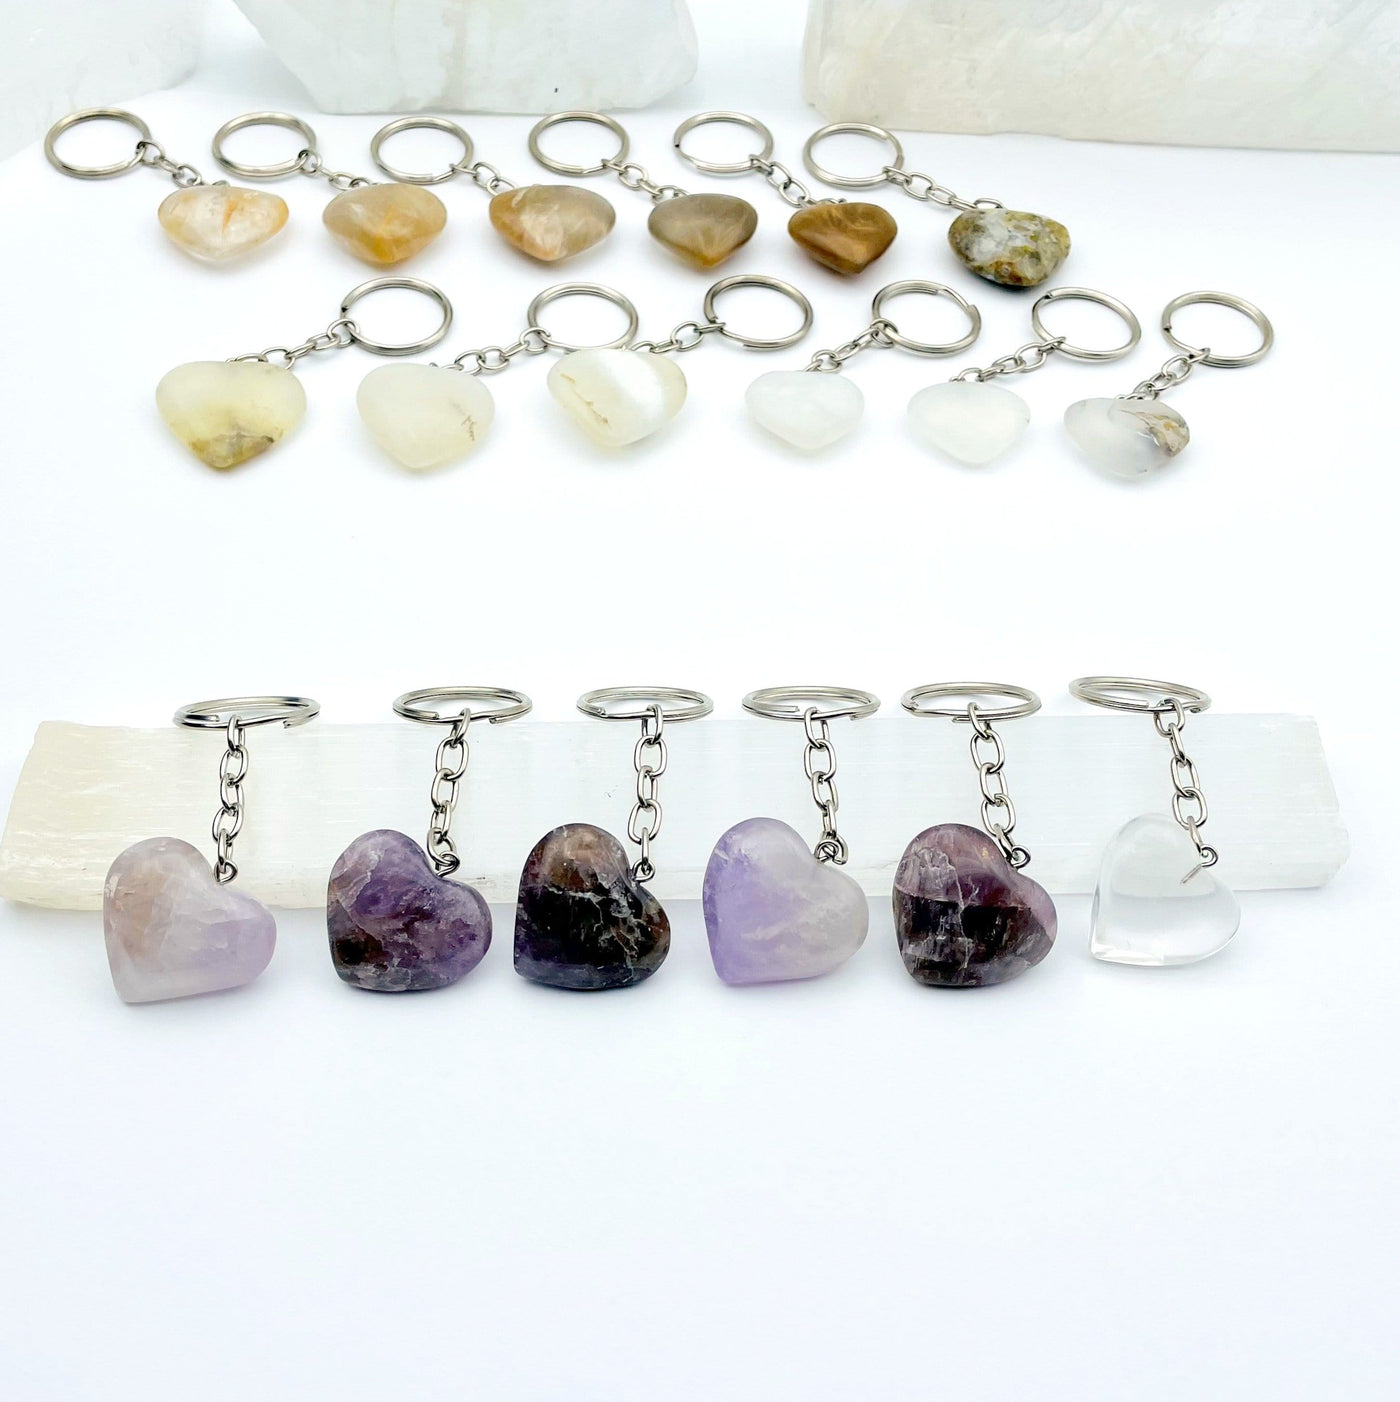 amethyst heart keychain displayed to show variations in color and size